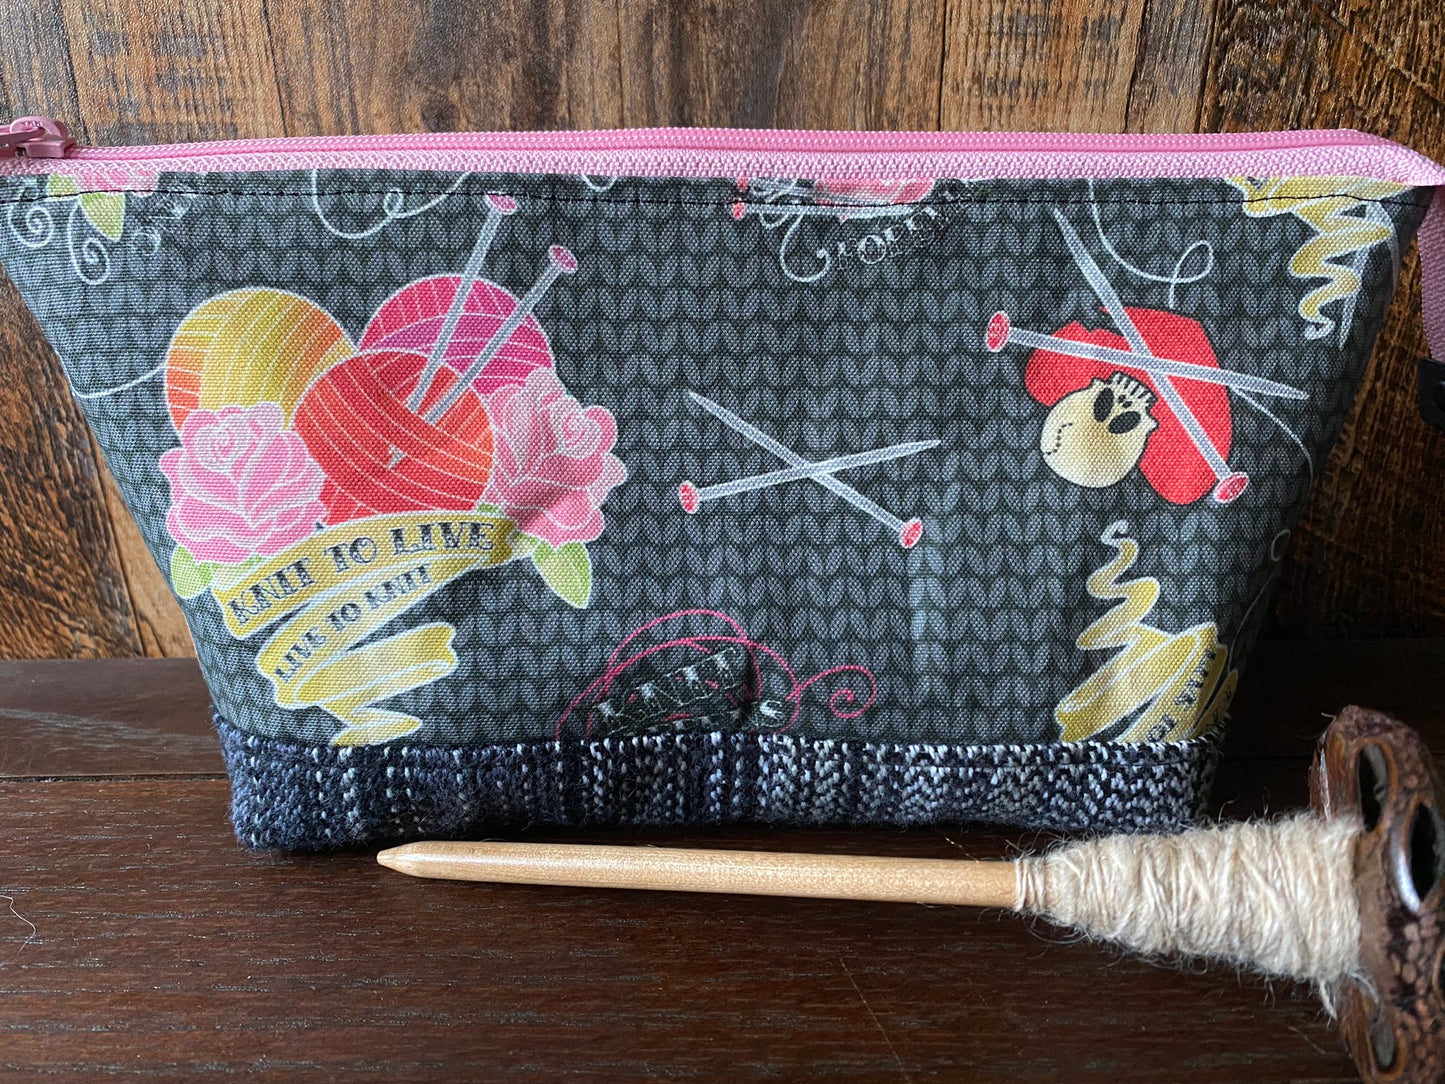 Medium Live to Knit Open Wide Spindle Bag